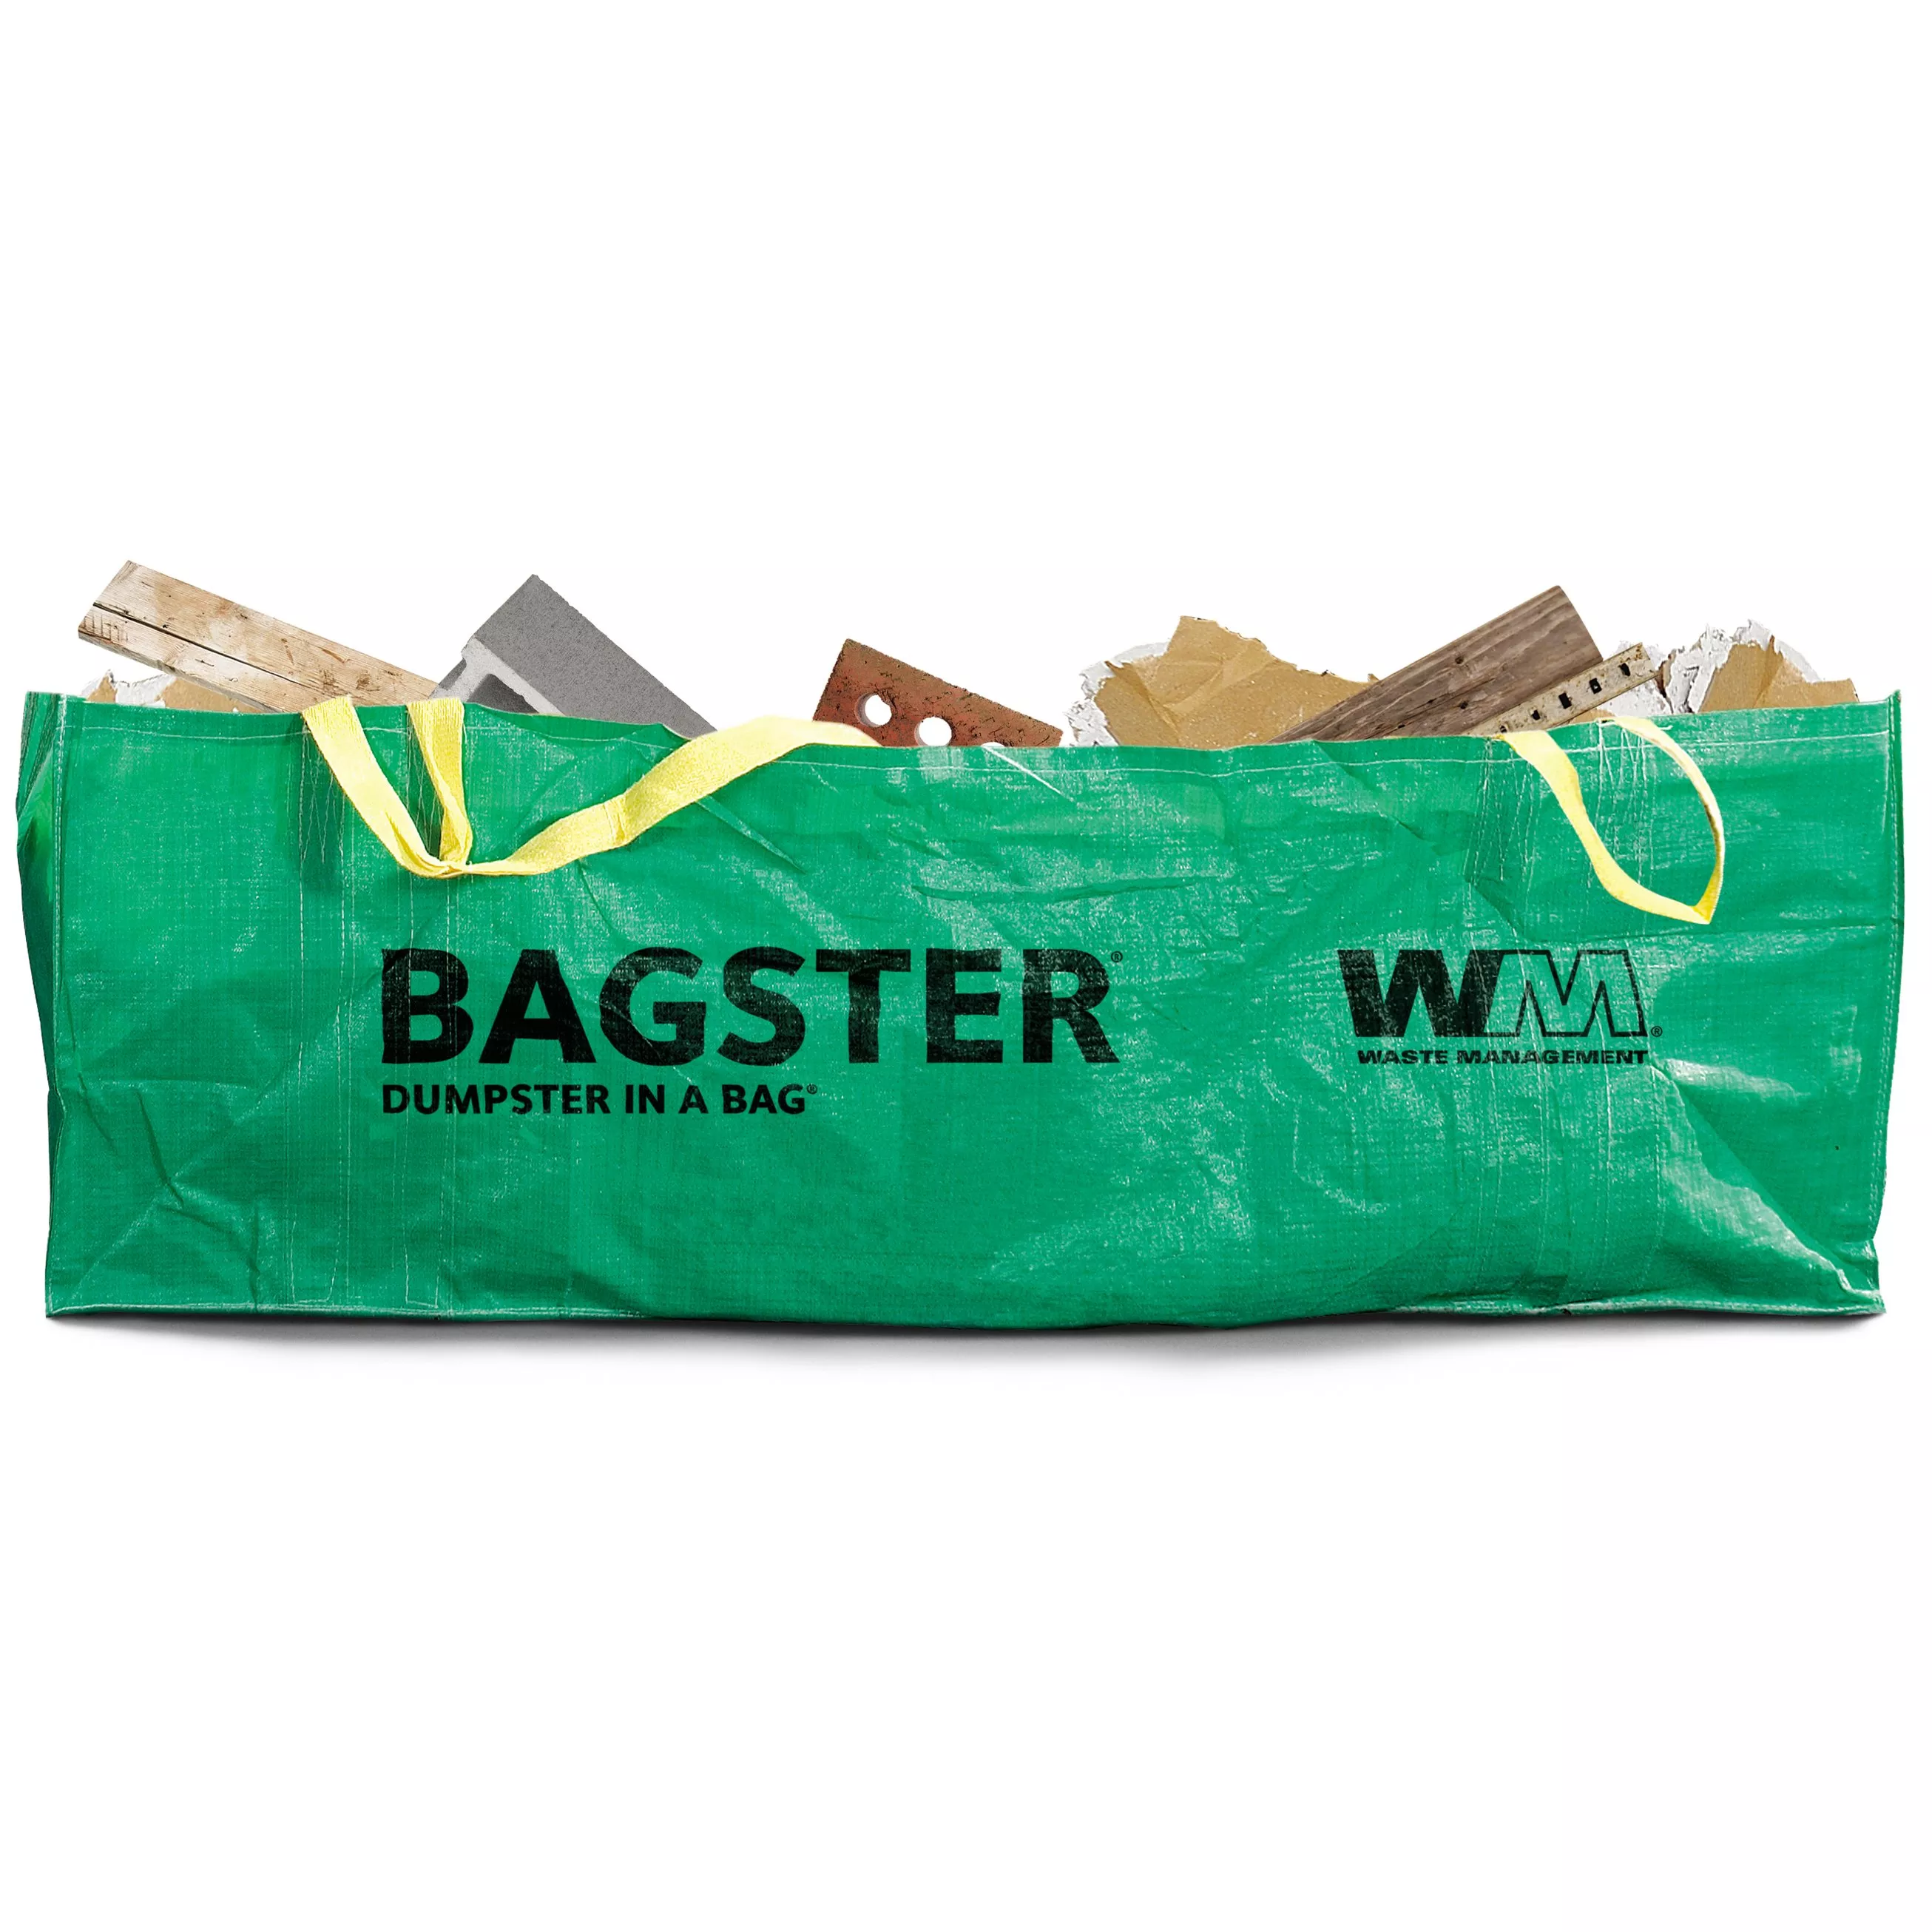 Bagster 606-Gallon Large Contractor Trash Bags, Dumpster Bag Holds 3300 lb  Green